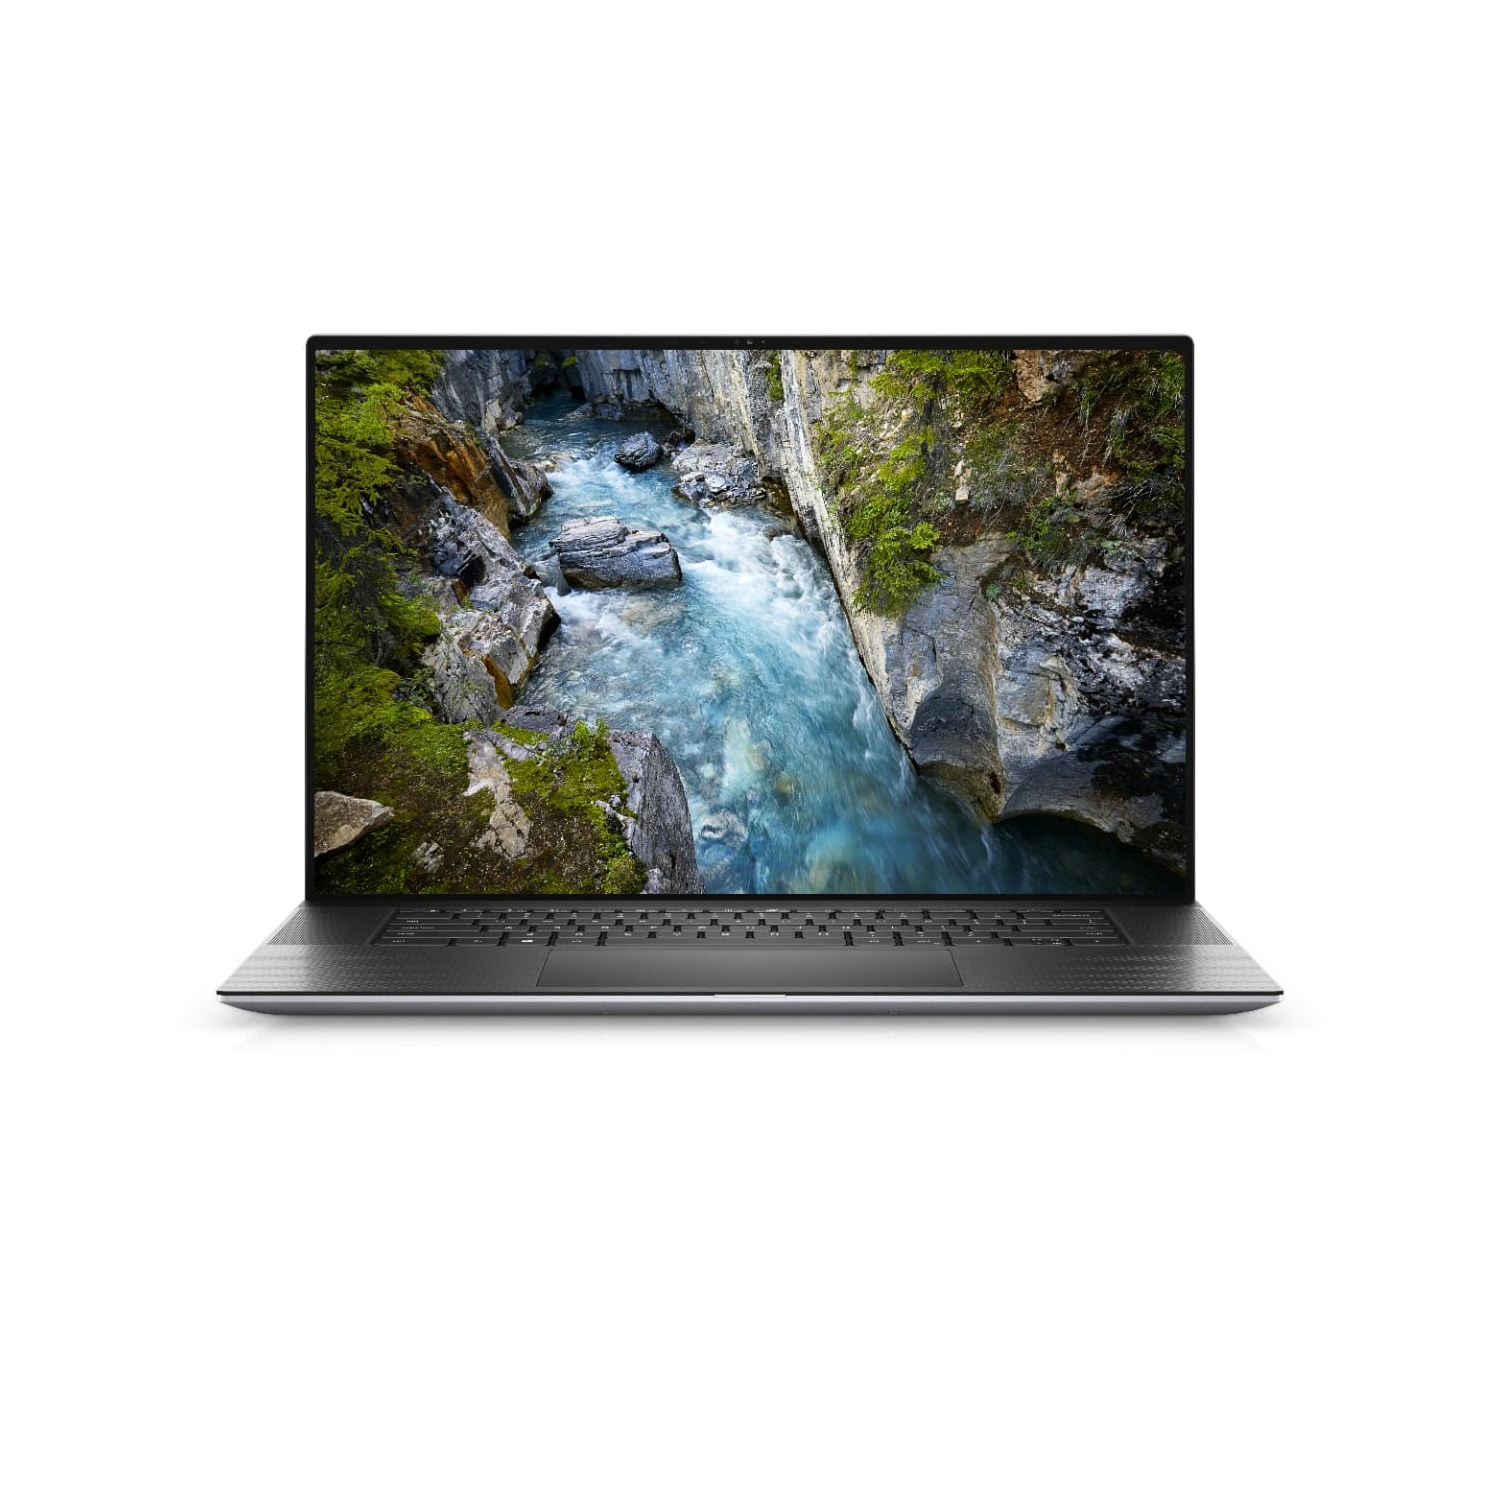 Refurbished (Excellent) - 2020 Dell Precision 5750 Laptop 17", Intel Core i5 10th Gen, i5-10400H, 4.6Ghz, 256GB SSD, 16GB RAM, 1920x1200 FHD+, Windows 10 Pro Certified